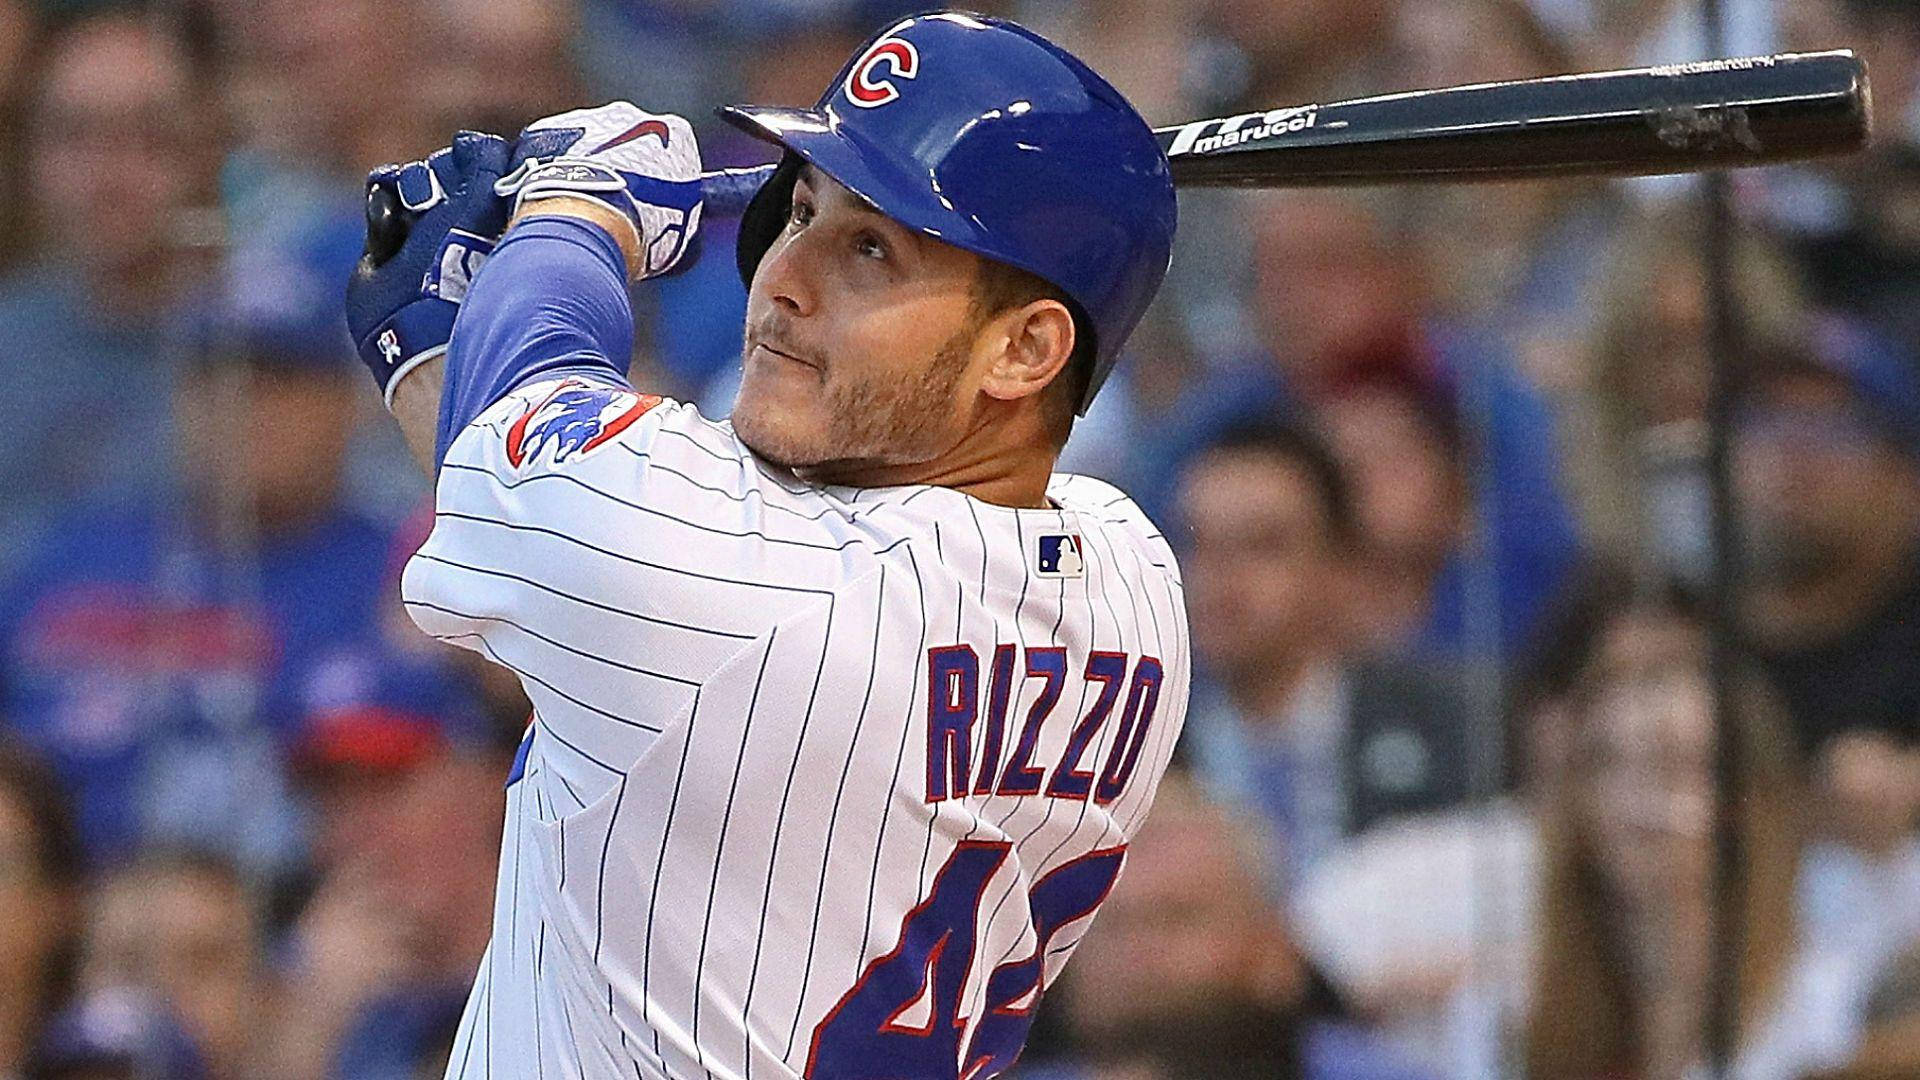 100+] Anthony Rizzo Backgrounds